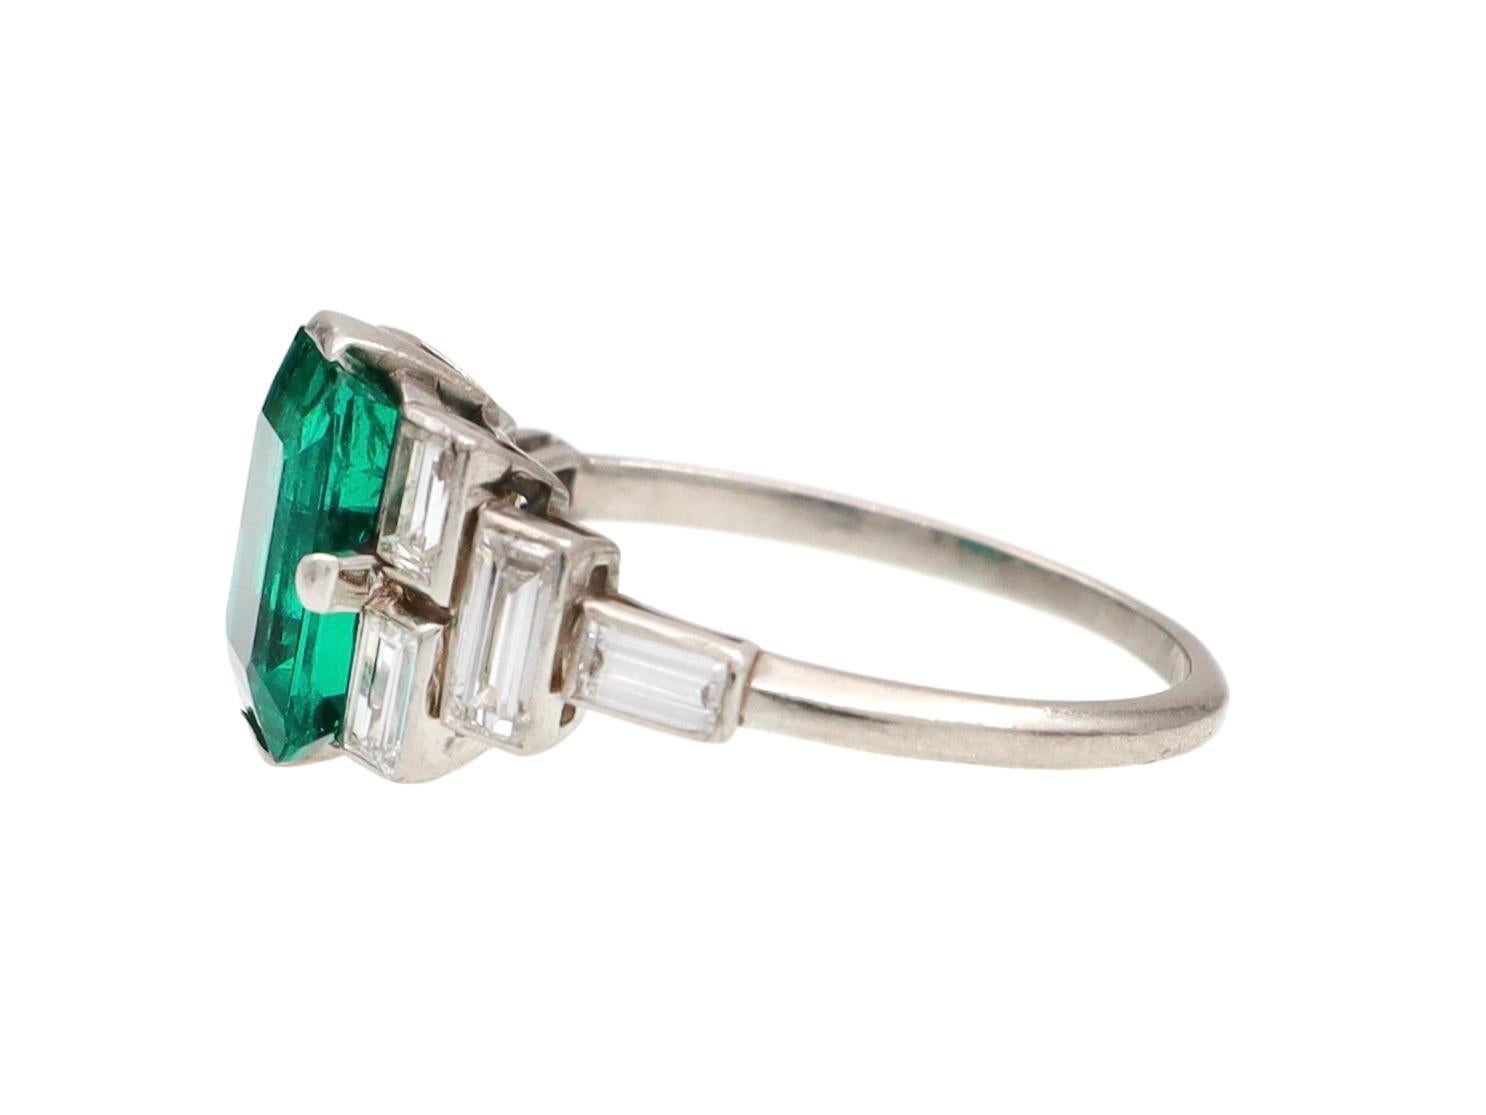 Art Deco Colombian emerald and baguette diamond ring in platinum. Set with an estimated 1.75ct octagonal emerald cut Colombian emerald with minor clarity enhancement in four claw compass setting, flanked to either side with eight rectangular